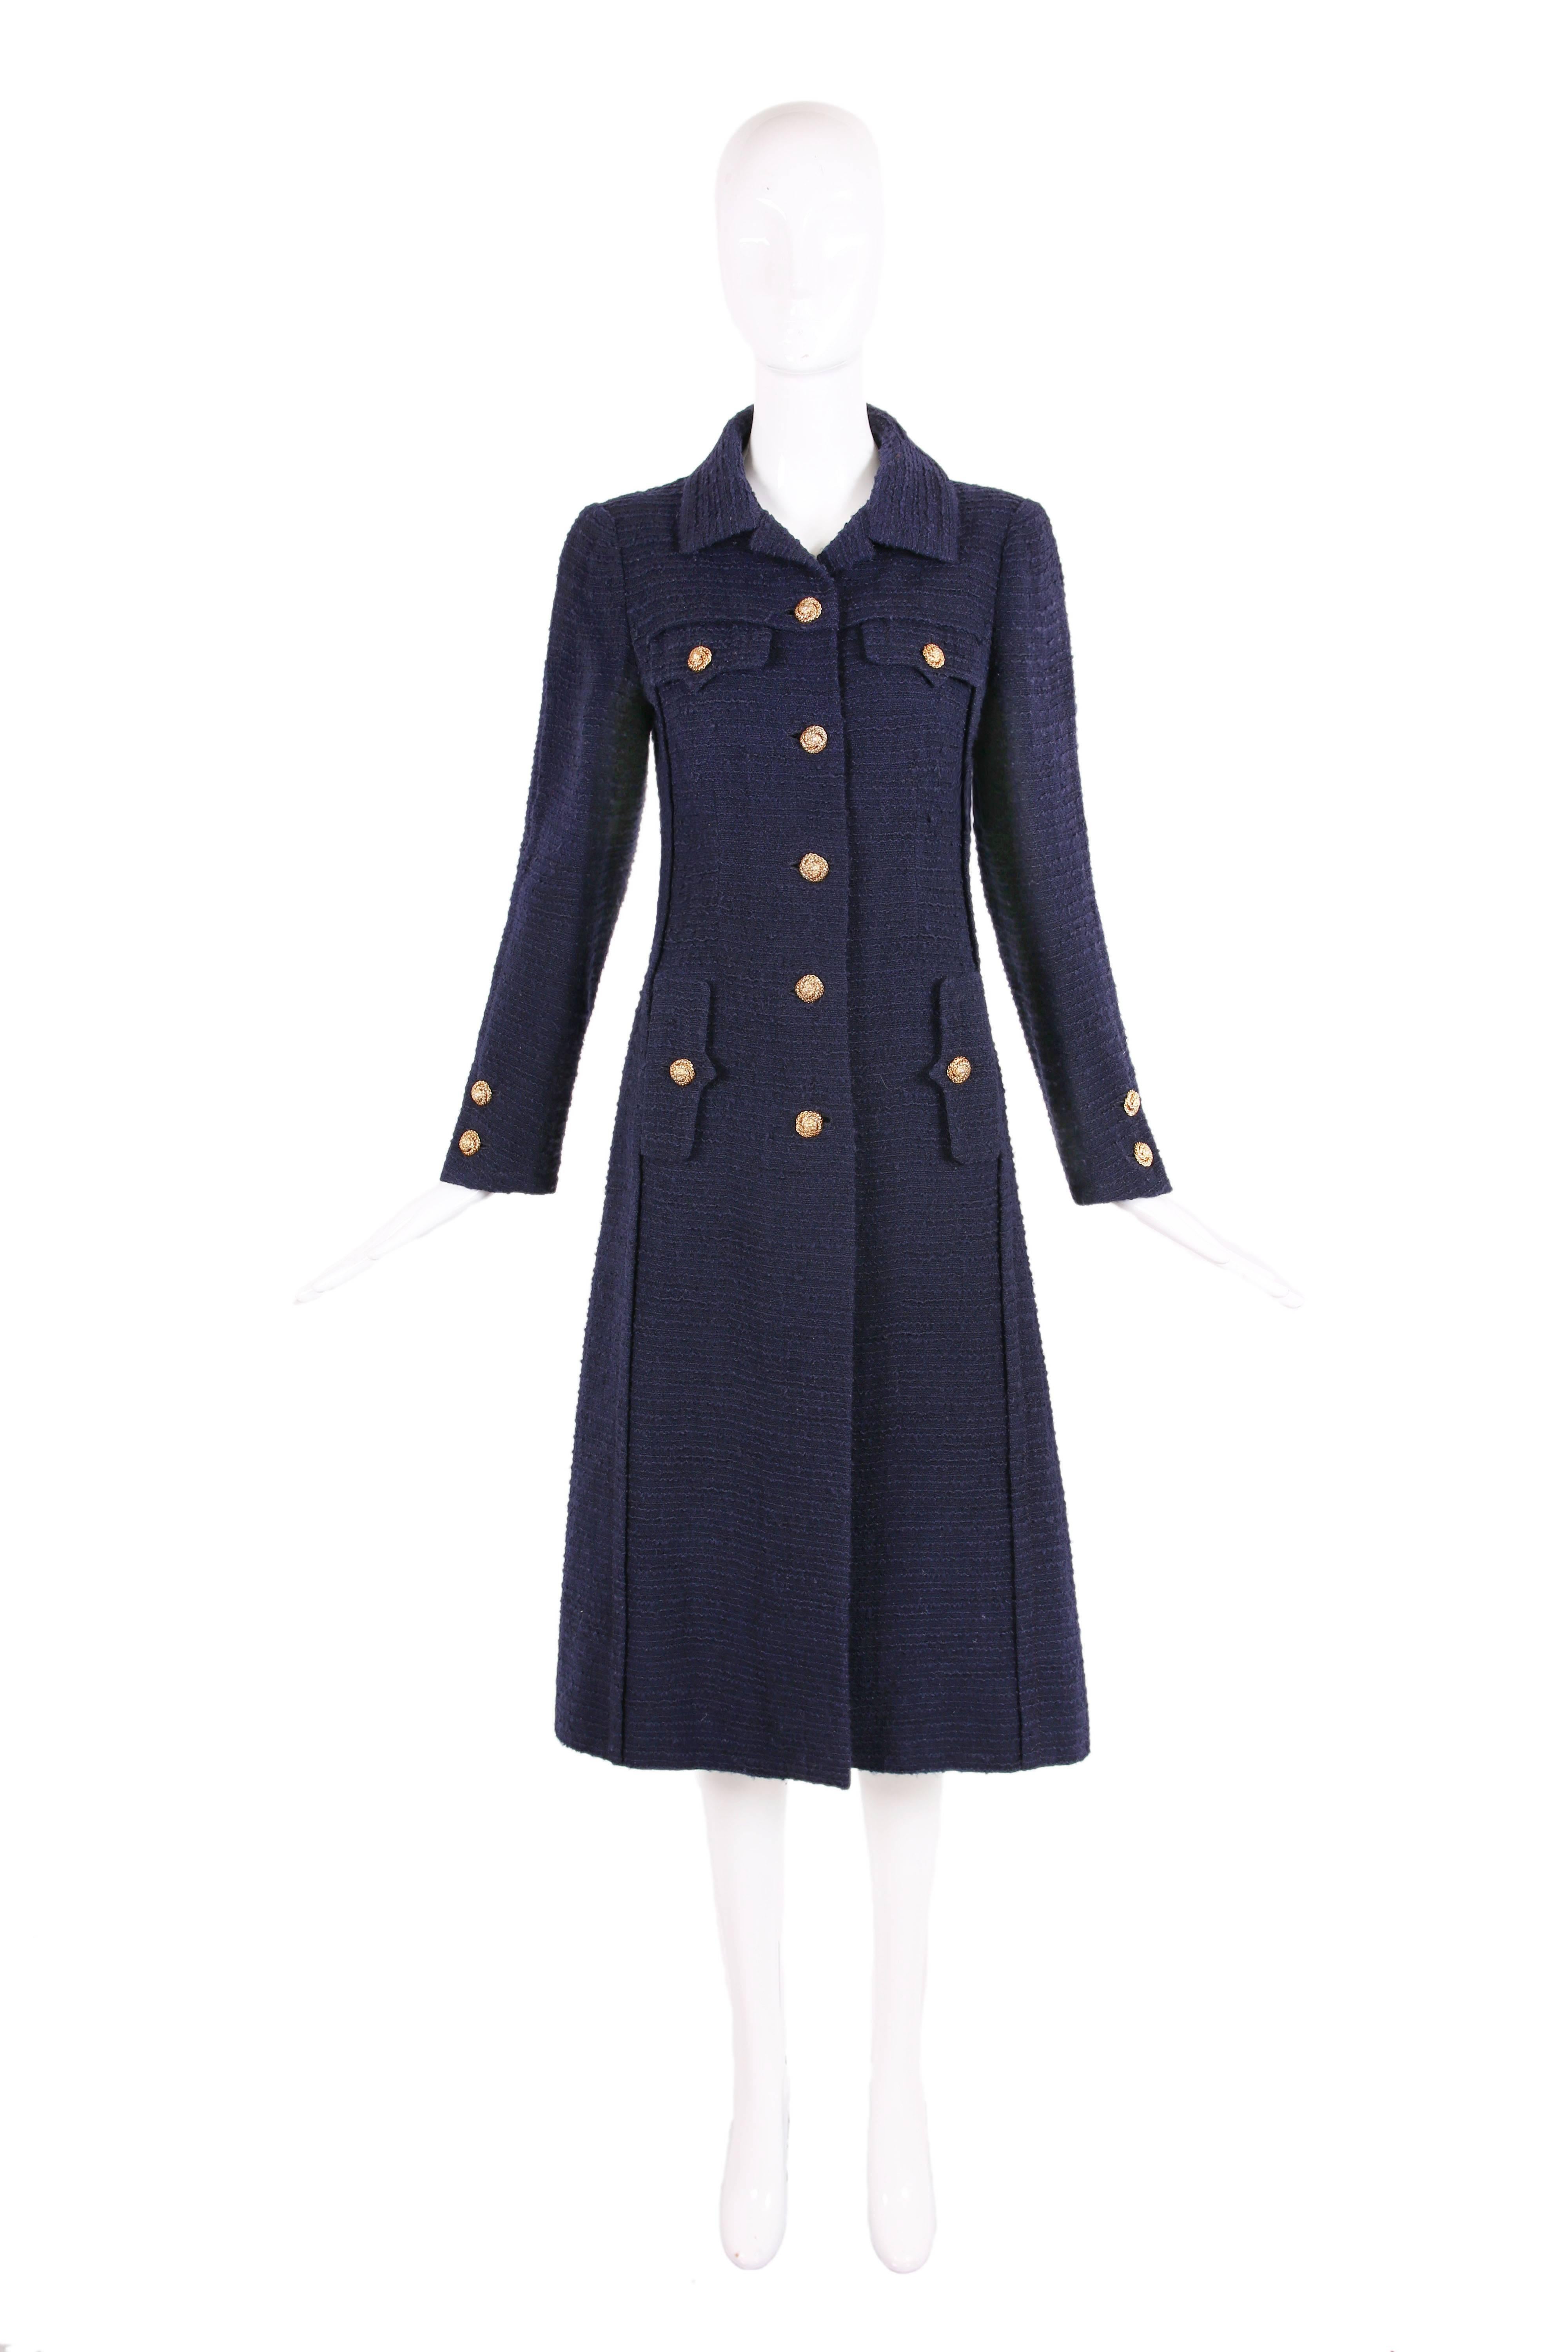 Rare Chanel haute couture navy blue wool boucle coat with round gold-toned buttons featuring a central lion head, No. 55591. Lined w/navy silk at the interior. In excellent condition - made to measure so please consult measurements. This coat should